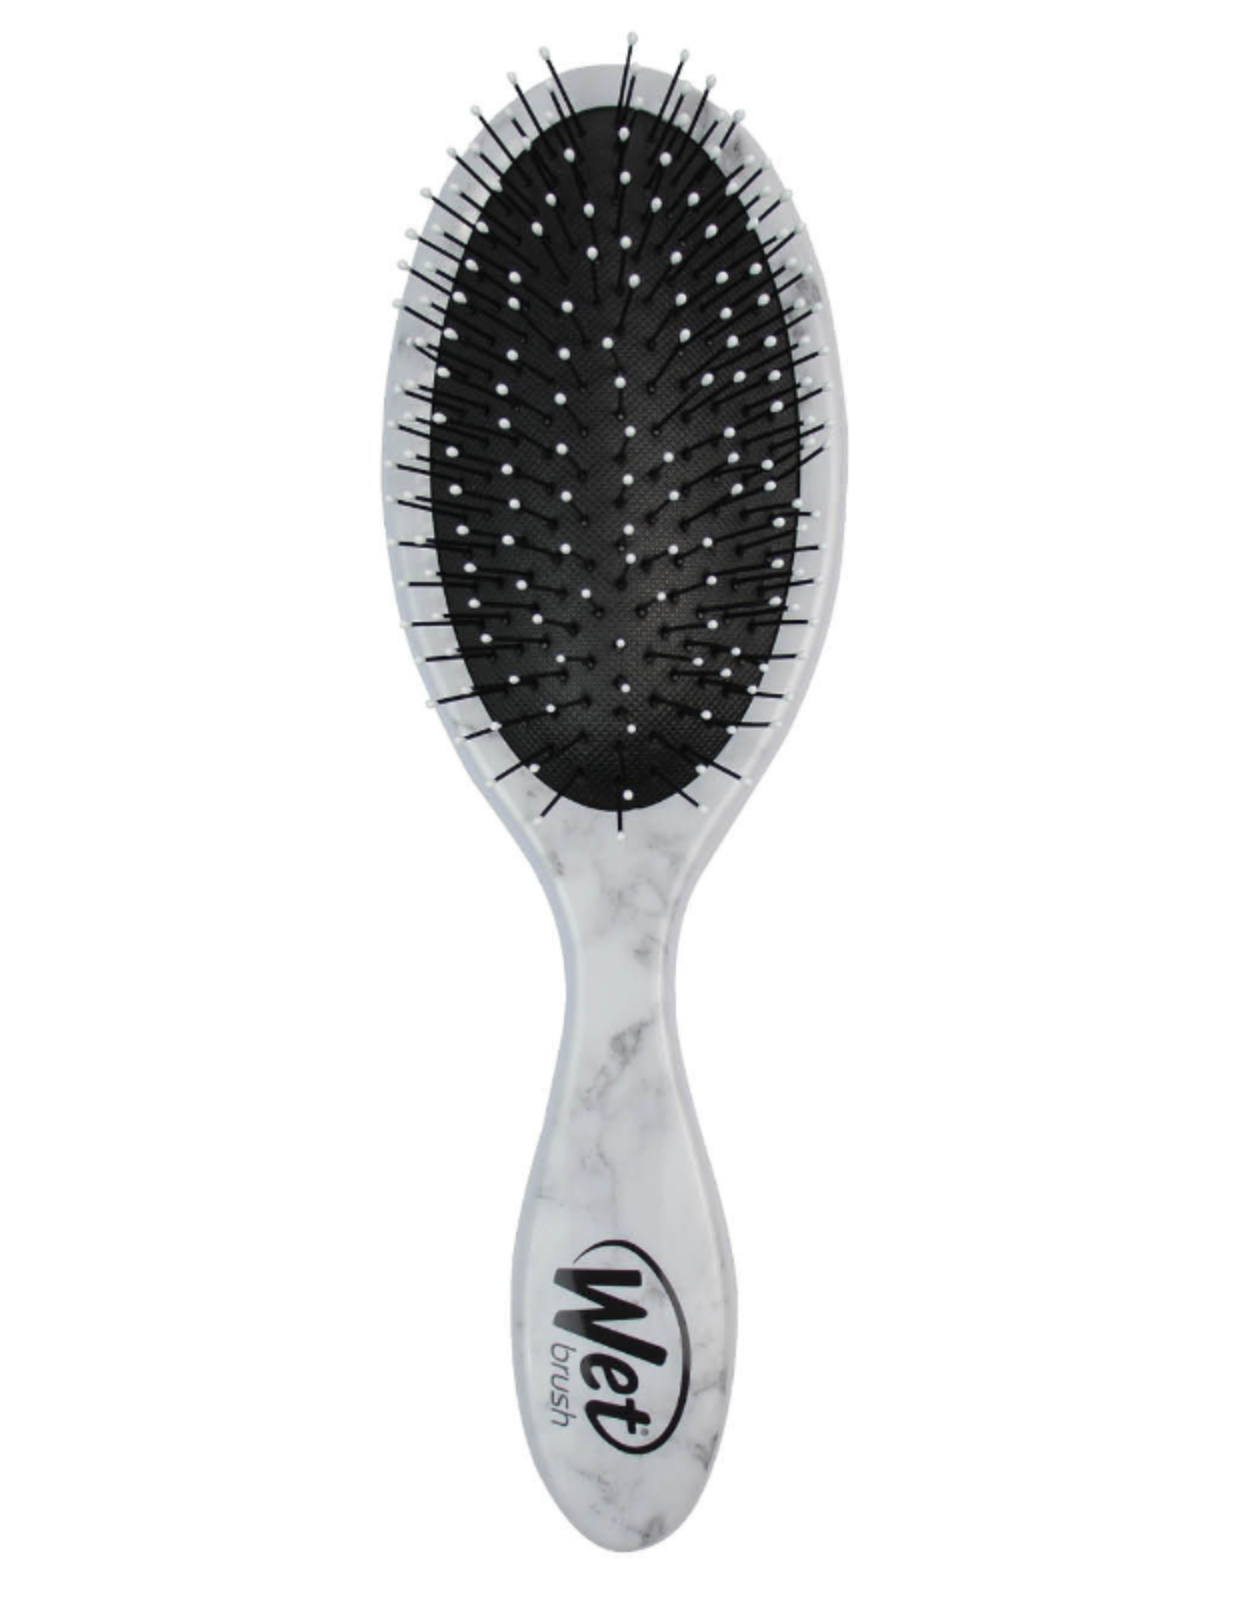 10 Mother's Day gift ideas - a new hair brush